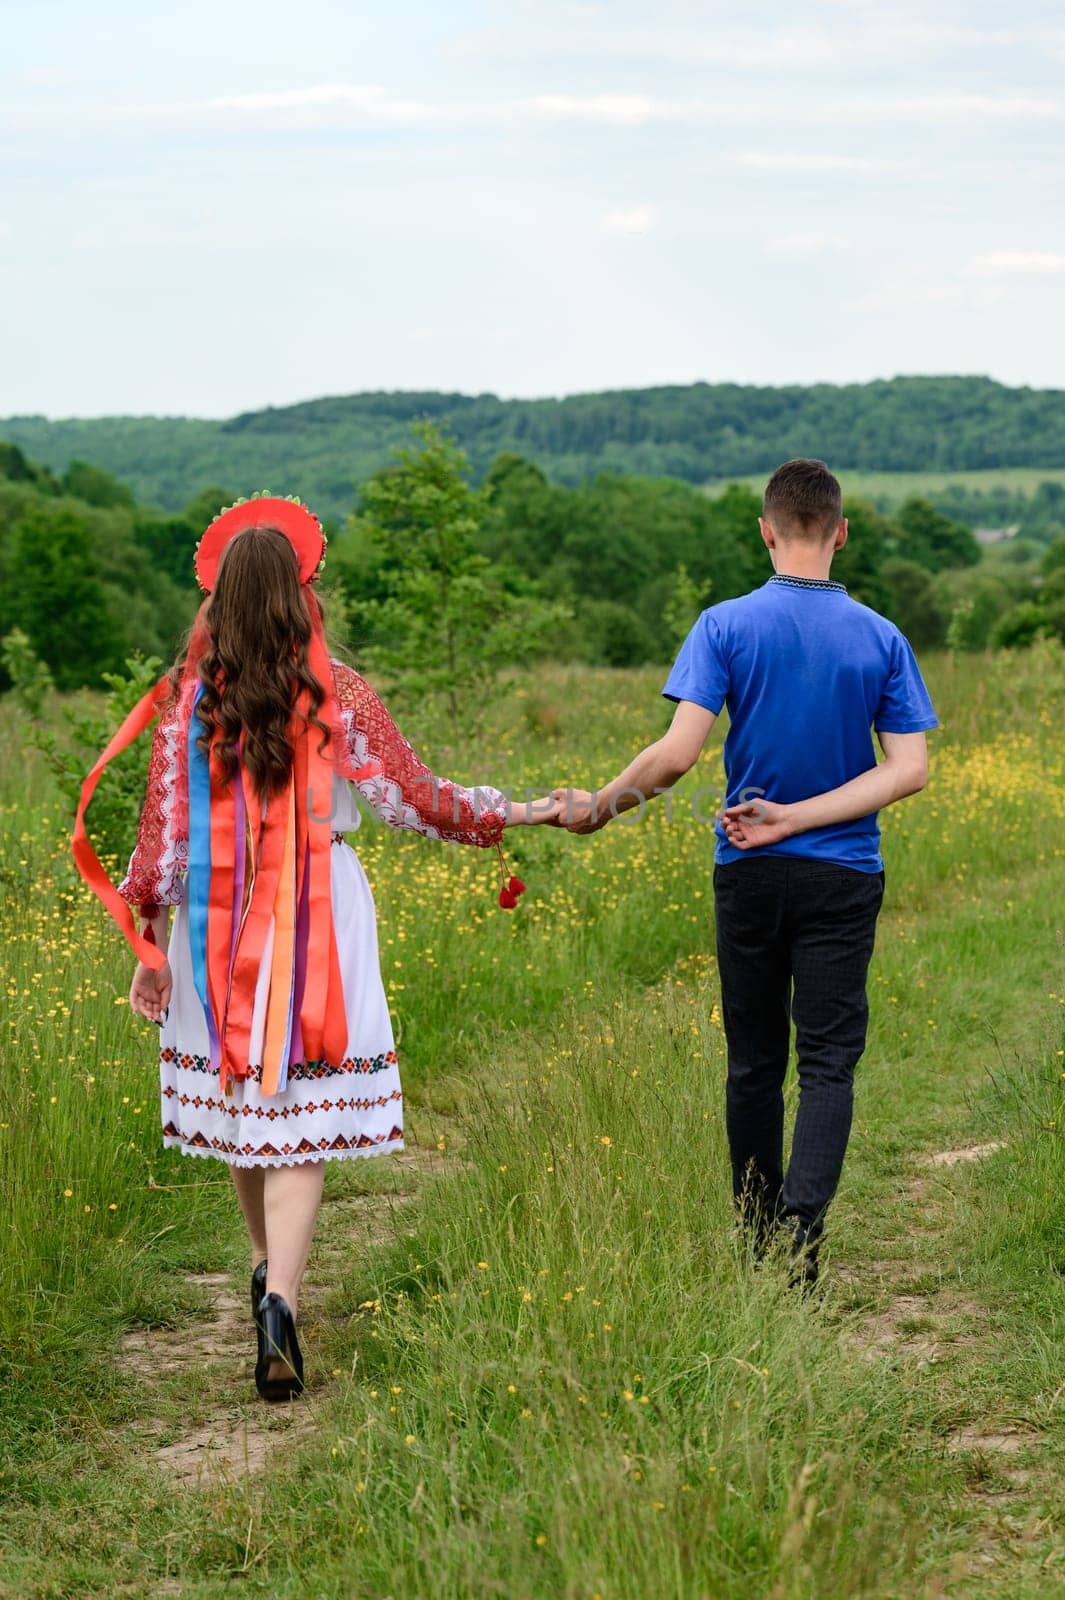 A boy and a girl ride hand in hand through the field, they are dressed in Ukrainian national clothes. by Niko_Cingaryuk